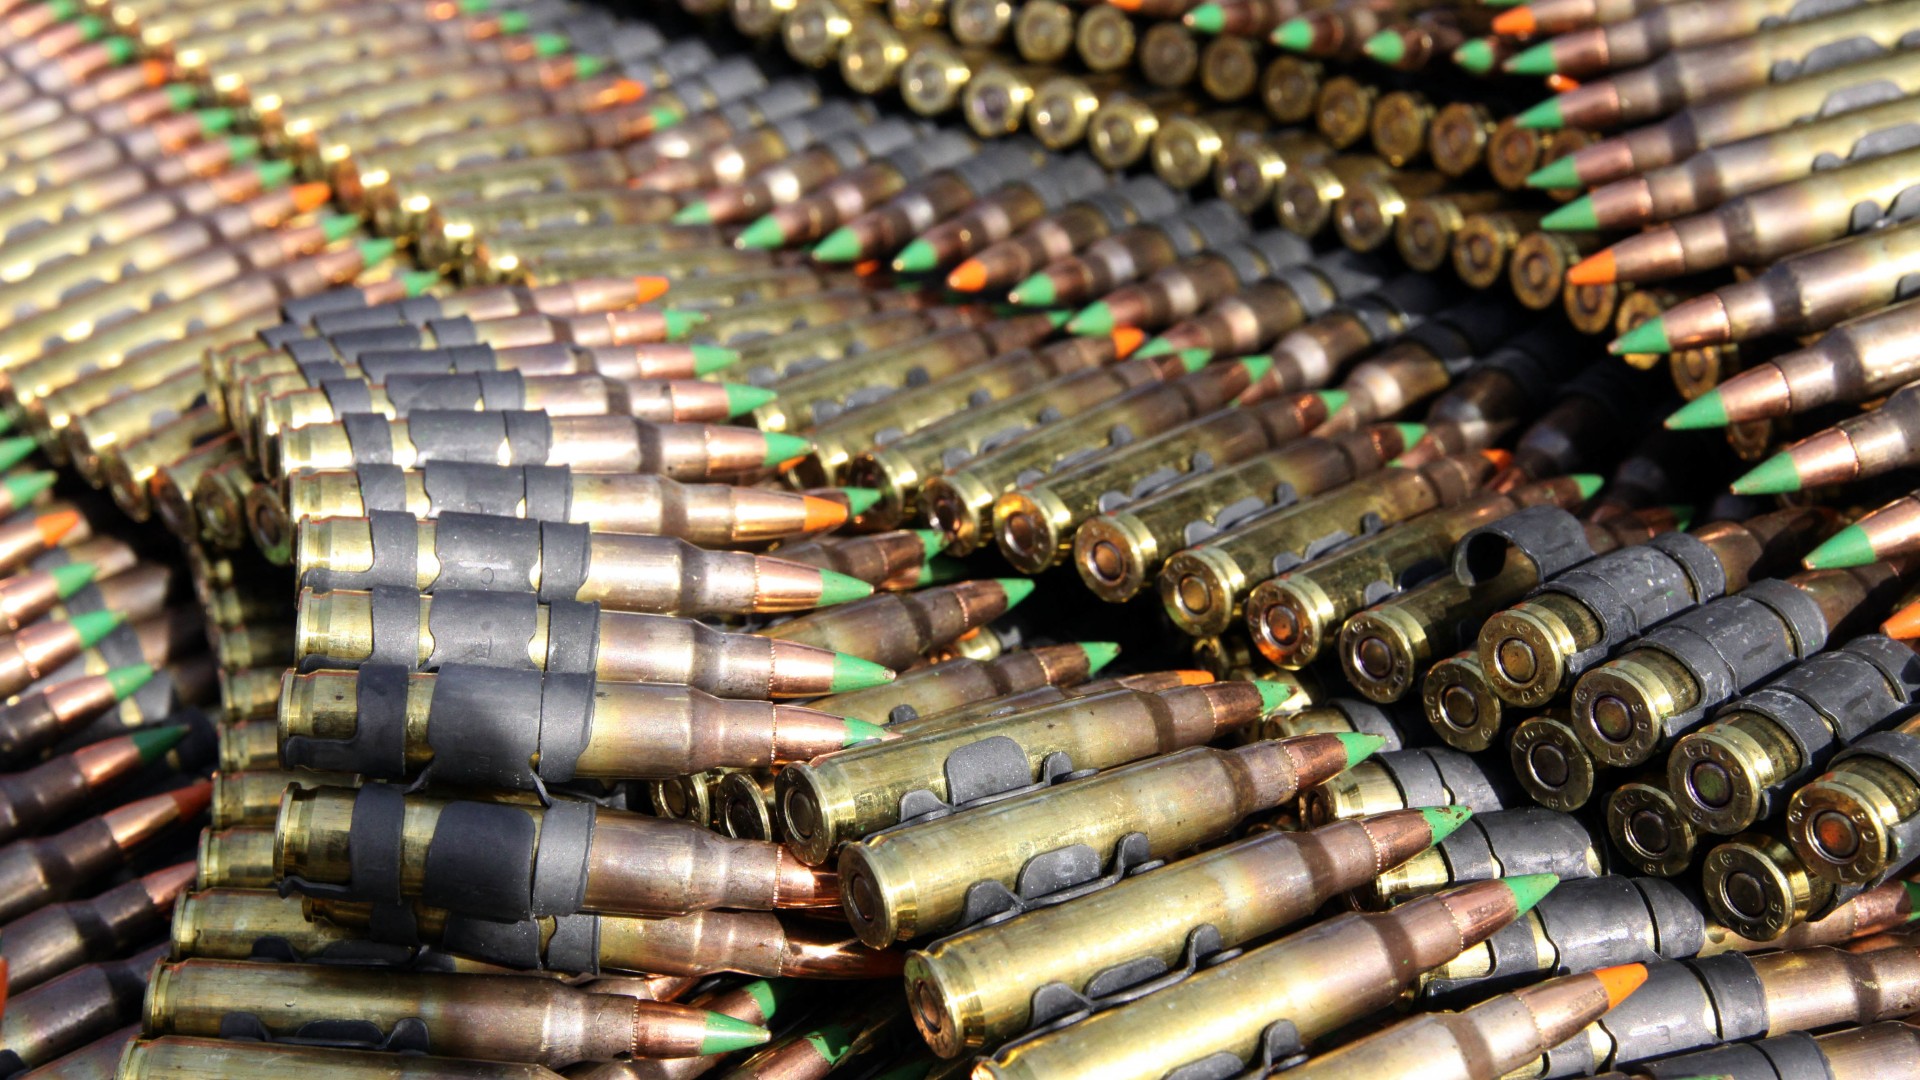 General 1920x1080 ammunition military weapon